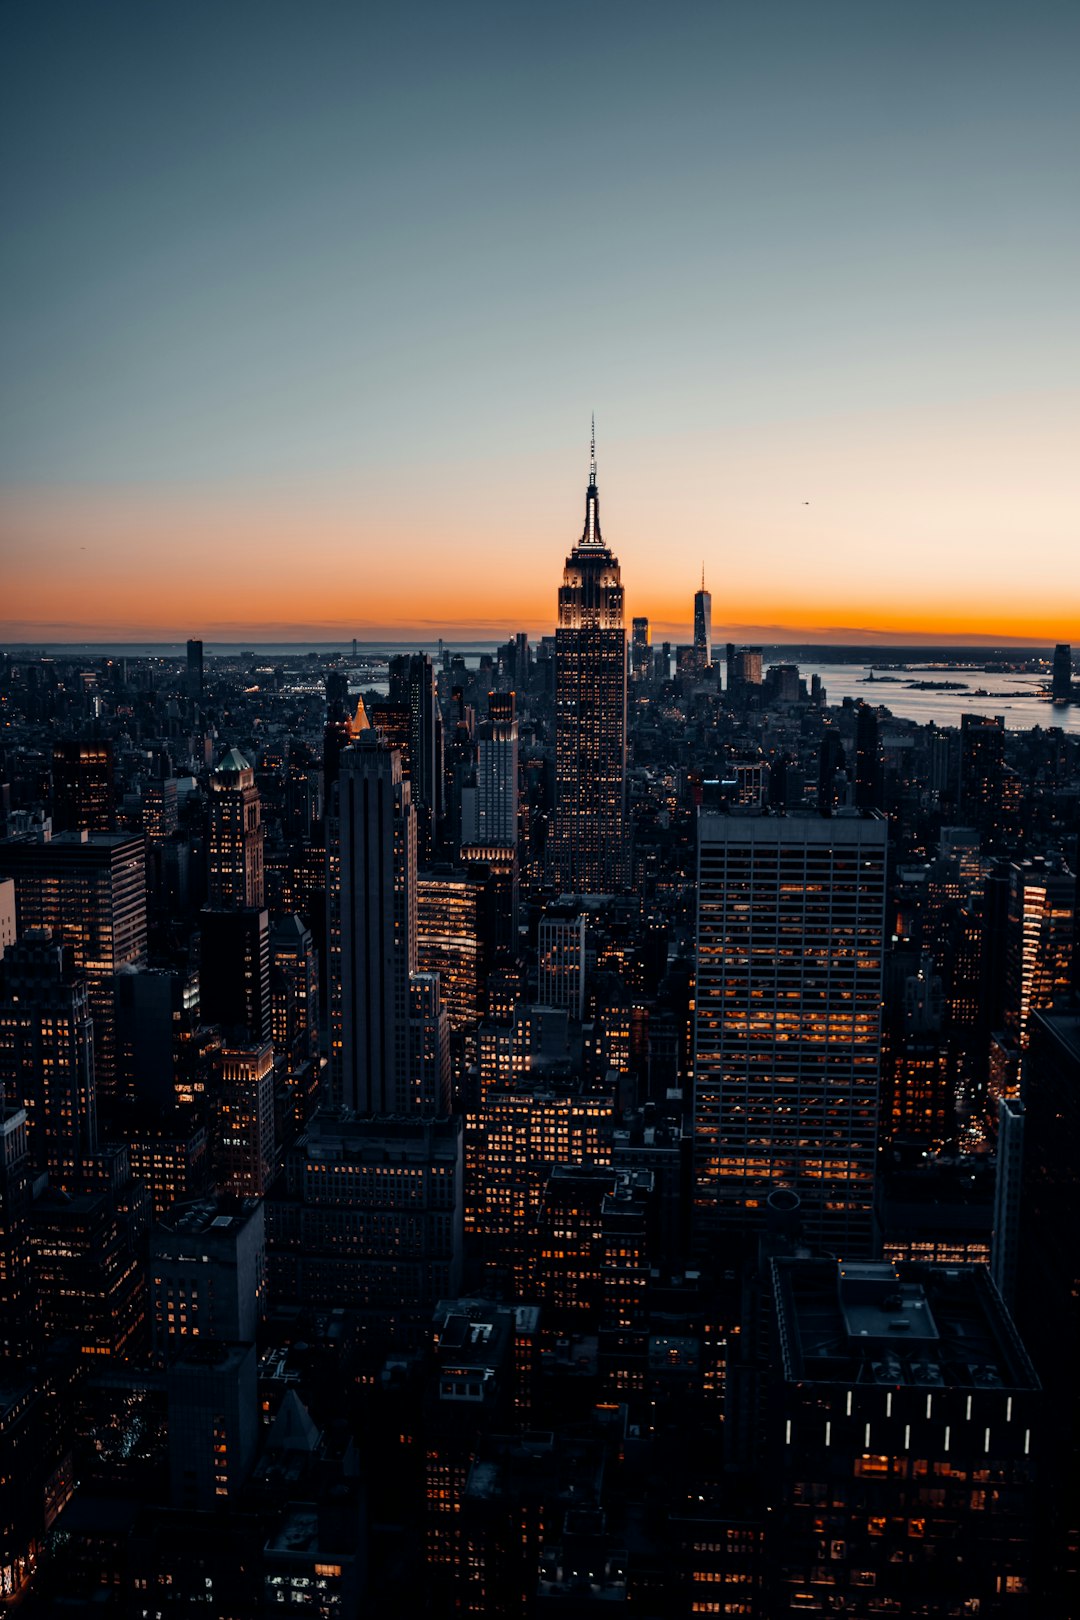 New York City skyline at dusk, capturing the city lights and skyscrapers from above. The view includes buildings like the Empire State Building and a drone shot to capture the full urban landscape. A dark blue sky with orange hues of sunset in the background. Shot on a Canon EOS R5 camera with an RF 24-70mm f/8 lens. –ar 85:128